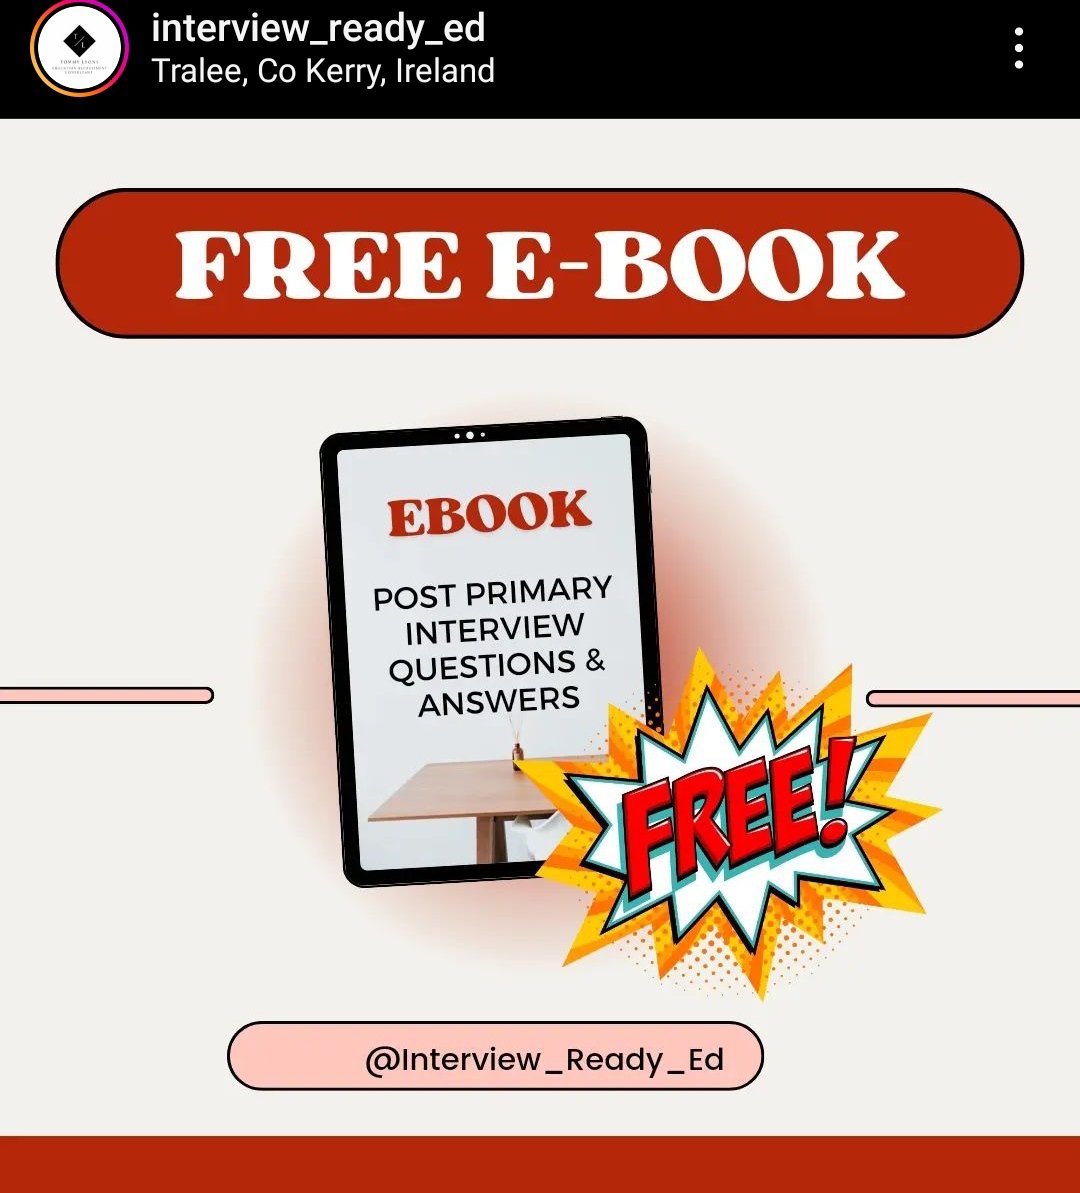 Free Post Primary interview sample Q's & Answers based on STAR ⭐ technique. 

To get this FREE resource:

Comment 'send' 
Make sure you're following so I can send it to you. Pop over to Instagram and follow there too 😜
#postprimary #edchatie @Leaders_SoE